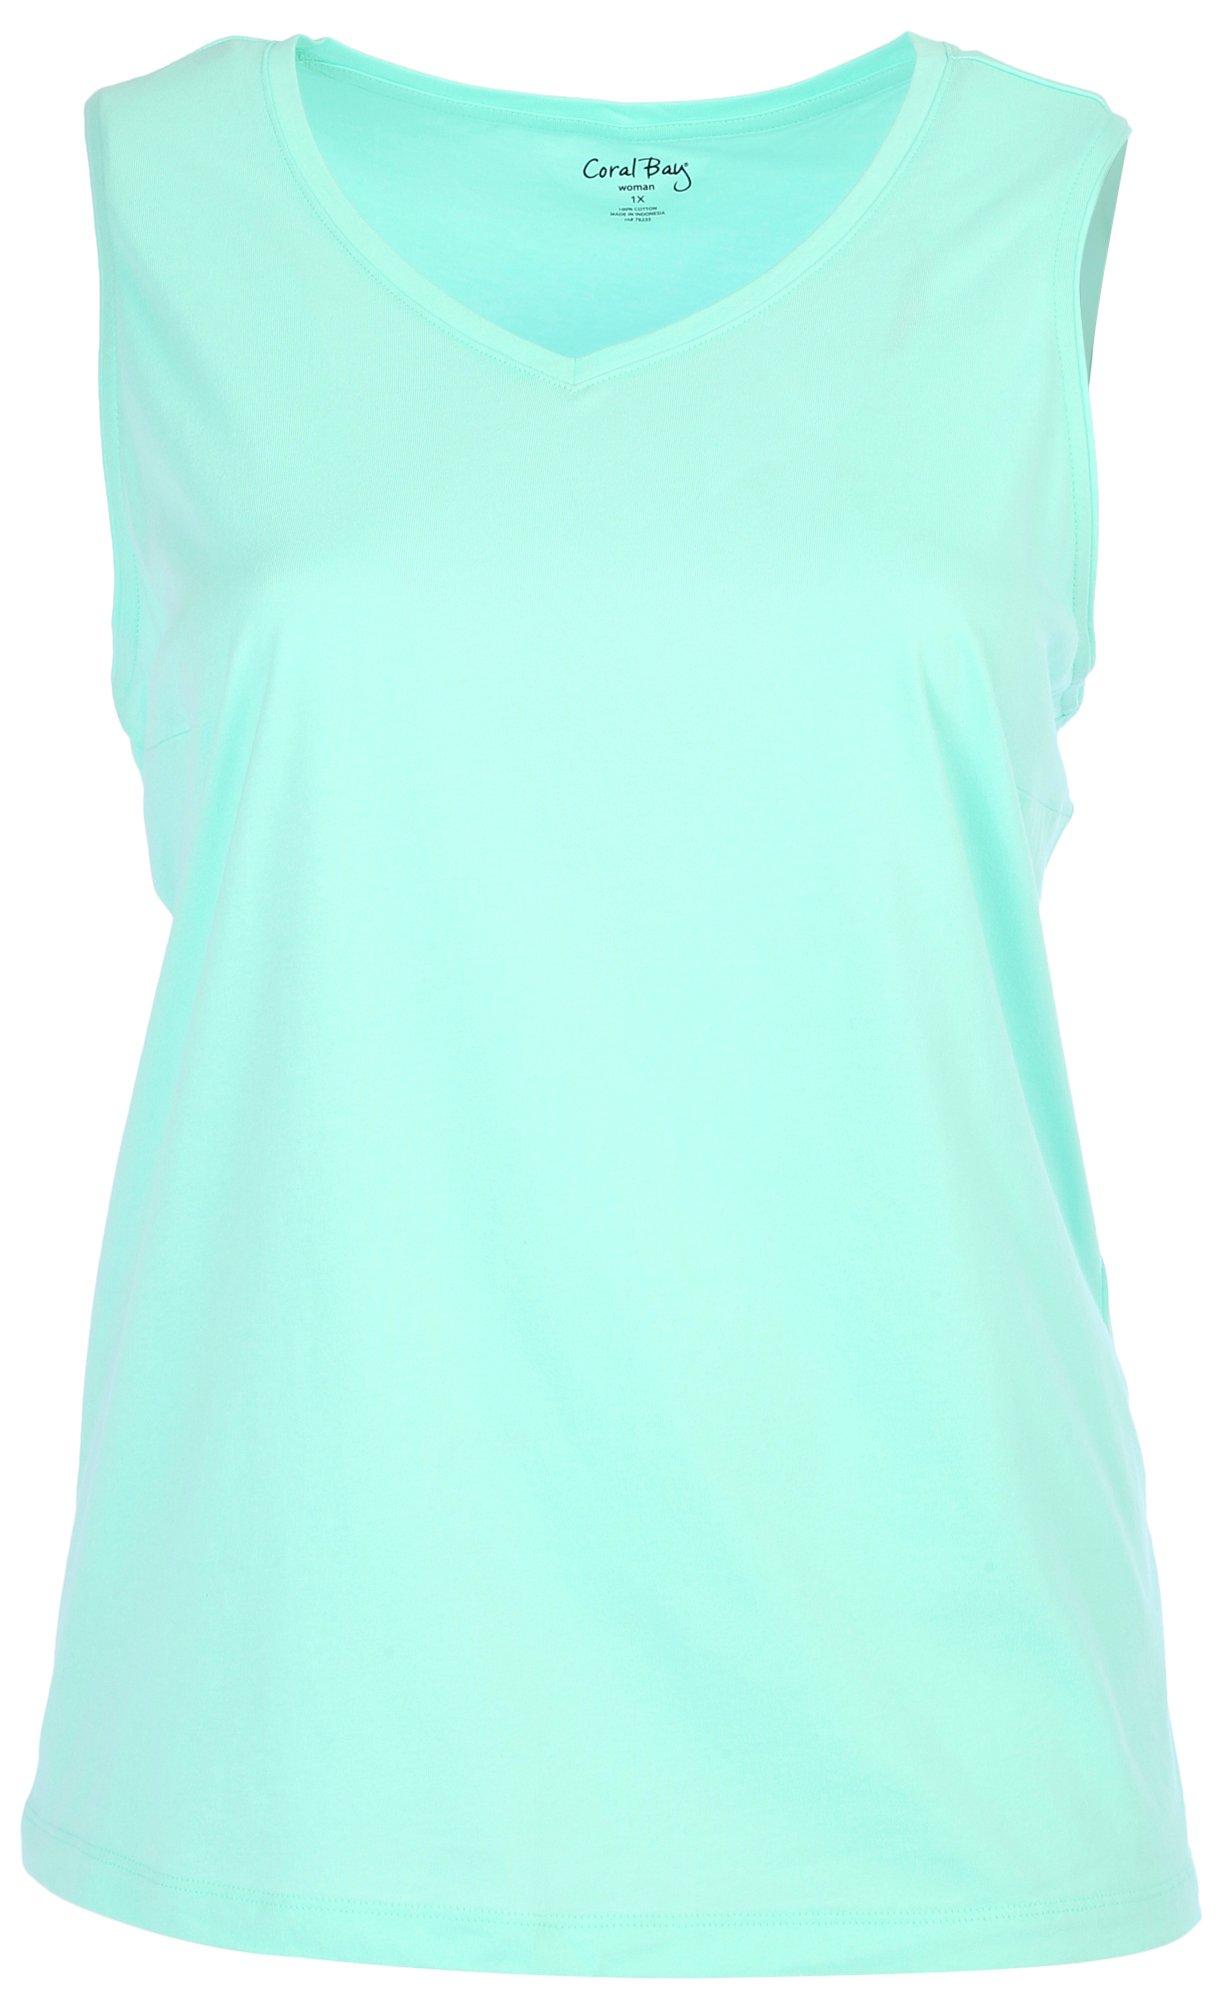 Plus Solid V-Neck Sleeveless Top